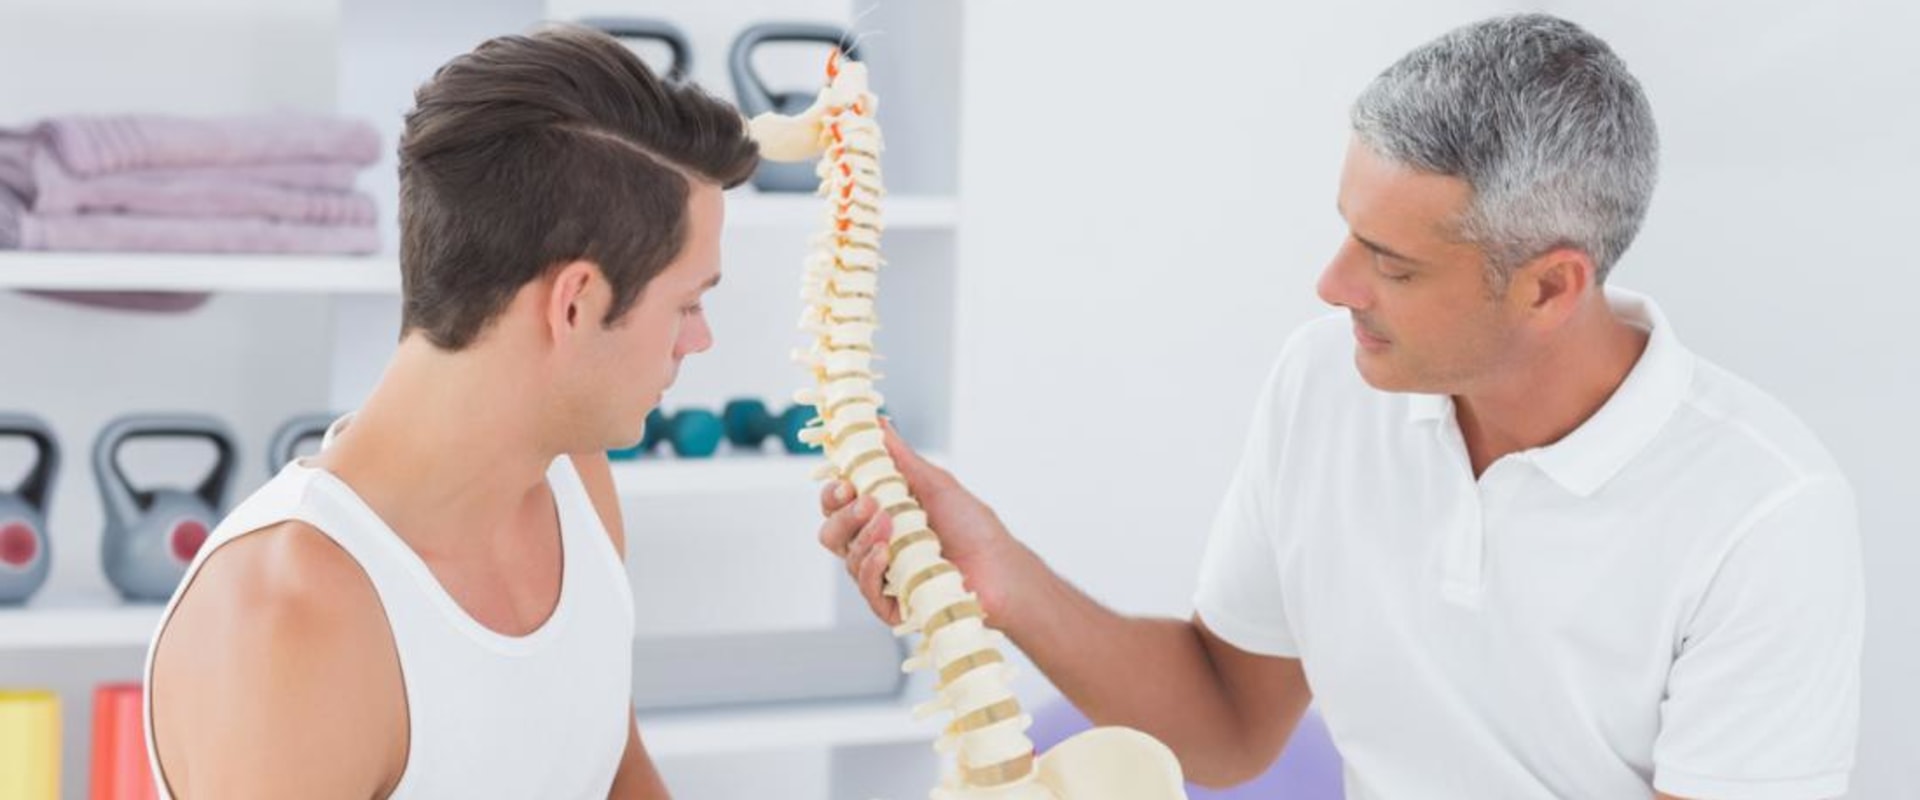 Are osteopathic physicians respected?